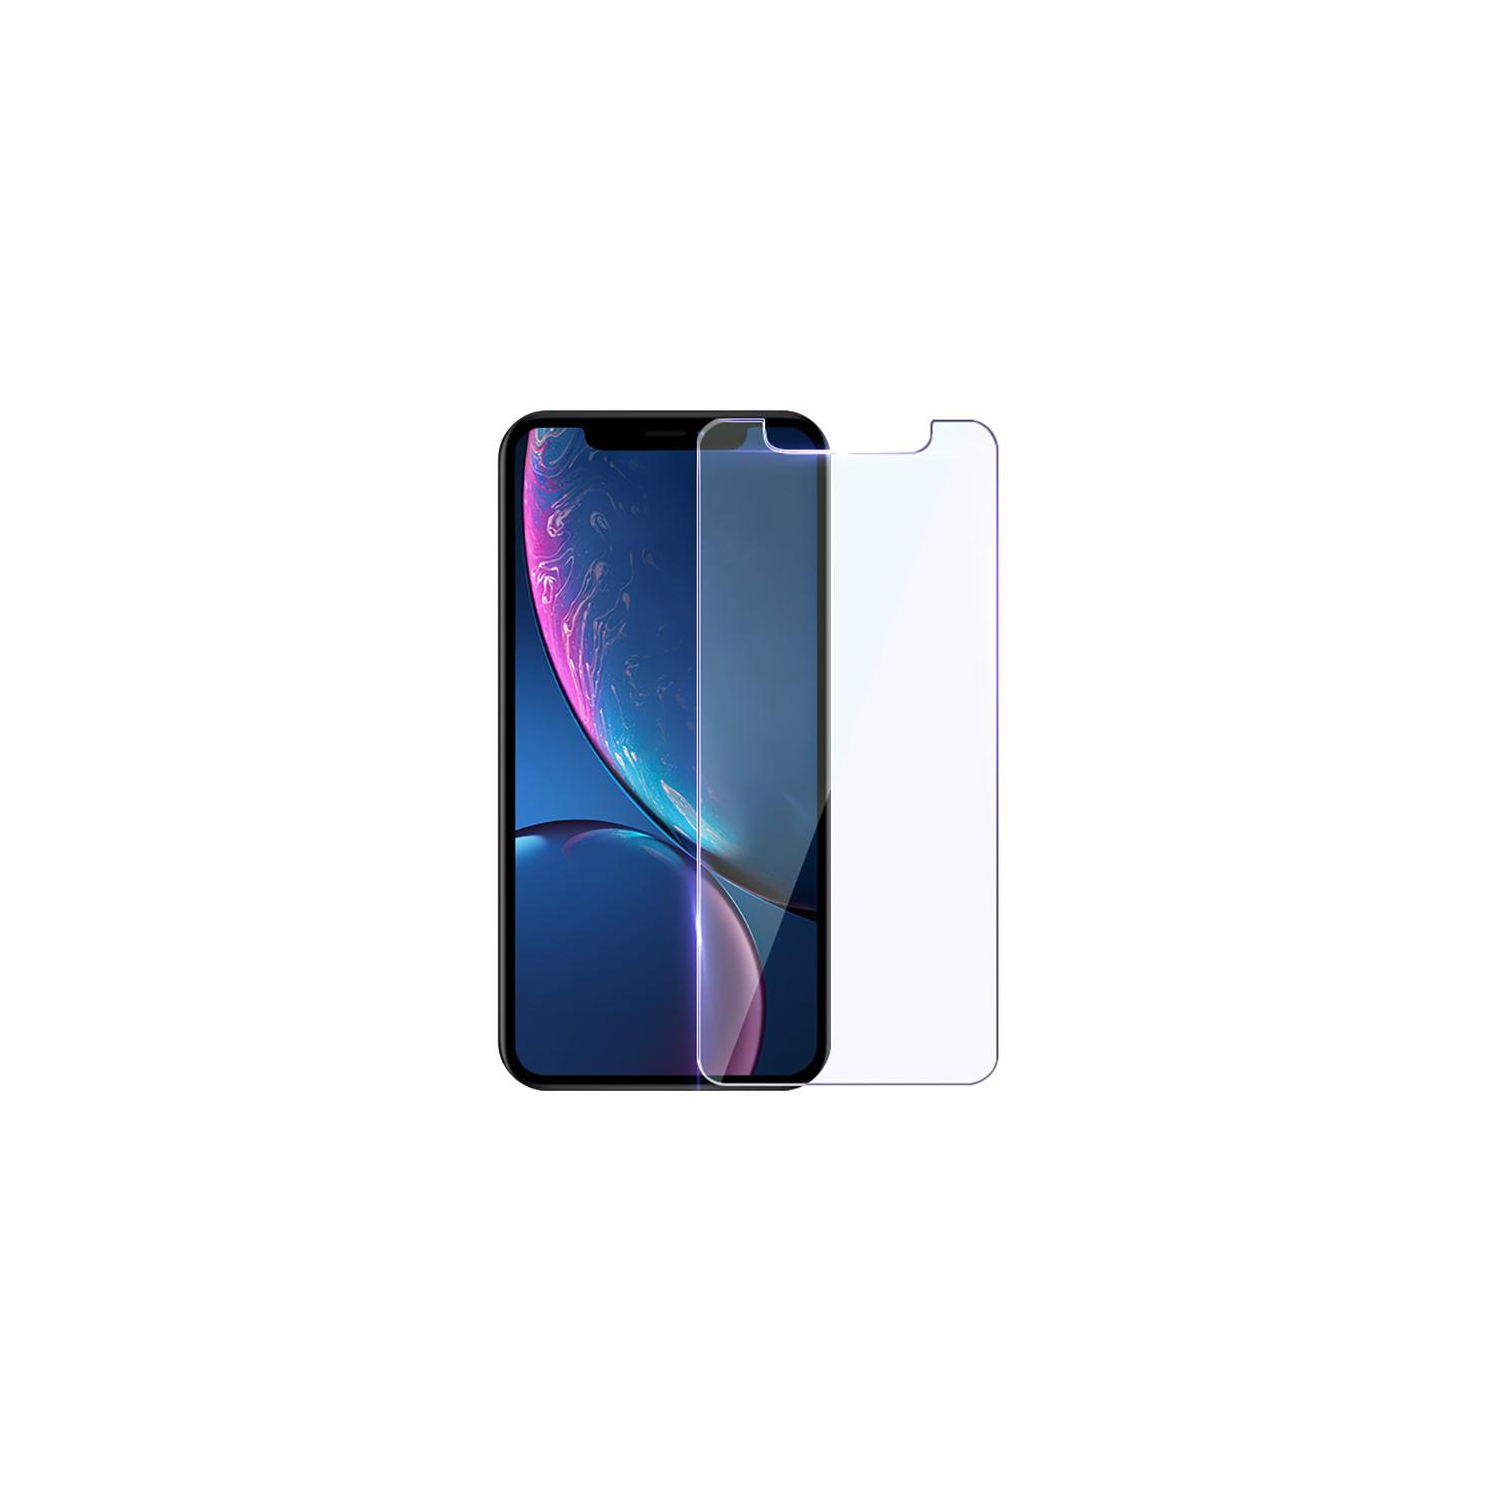 PANDACO Tempered Glass 0.26mm/2.5D Ultra Thin Screen Protector for iPhone XR